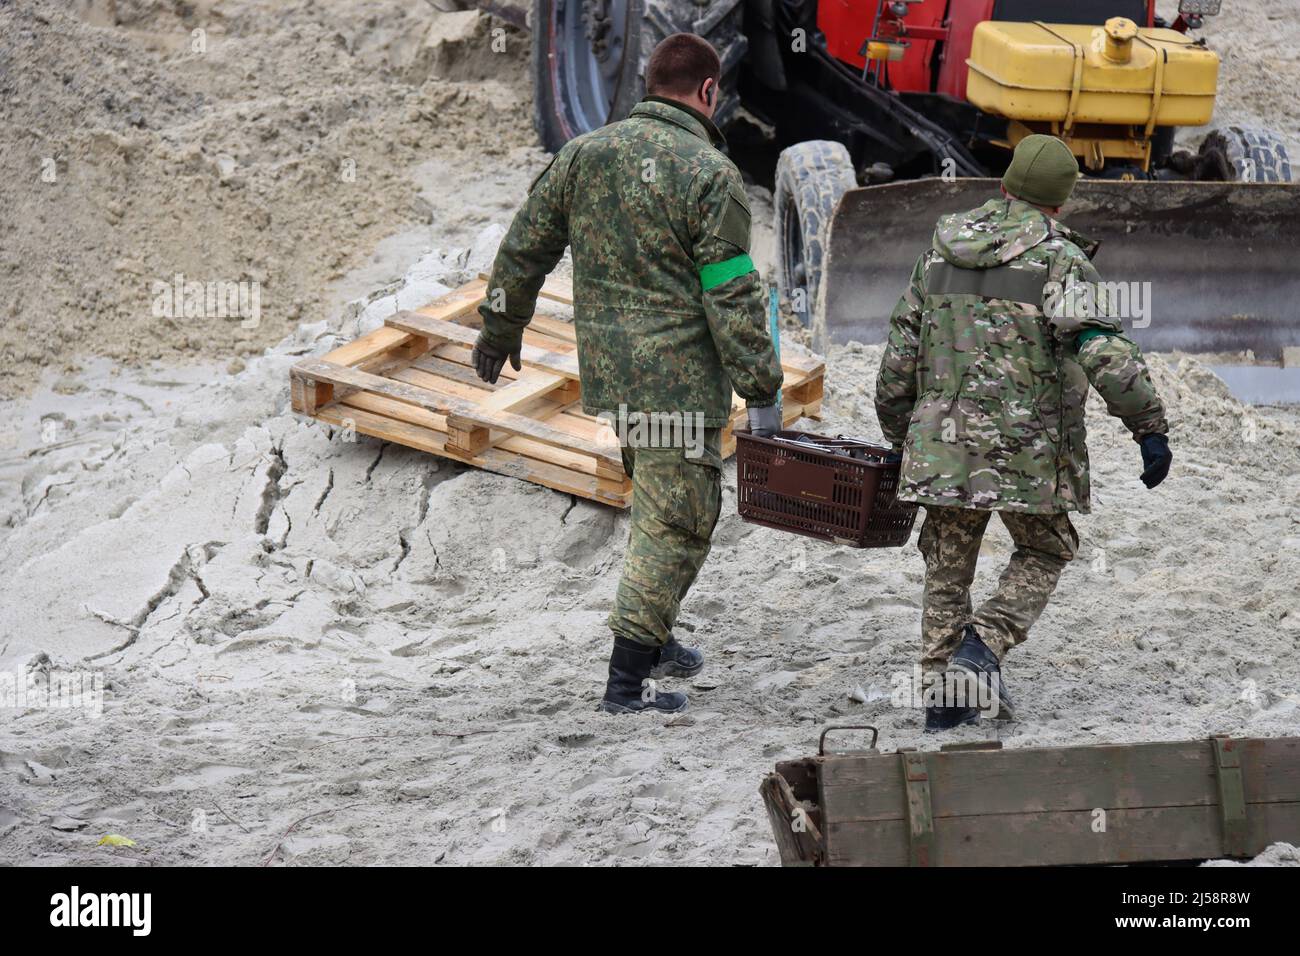 KYIV REGION, UKRAINE - APRIL 20, 2022 - Servicemen carry a crate as they work to dispose of ammunition collected in the territories liberated from Rus Stock Photo